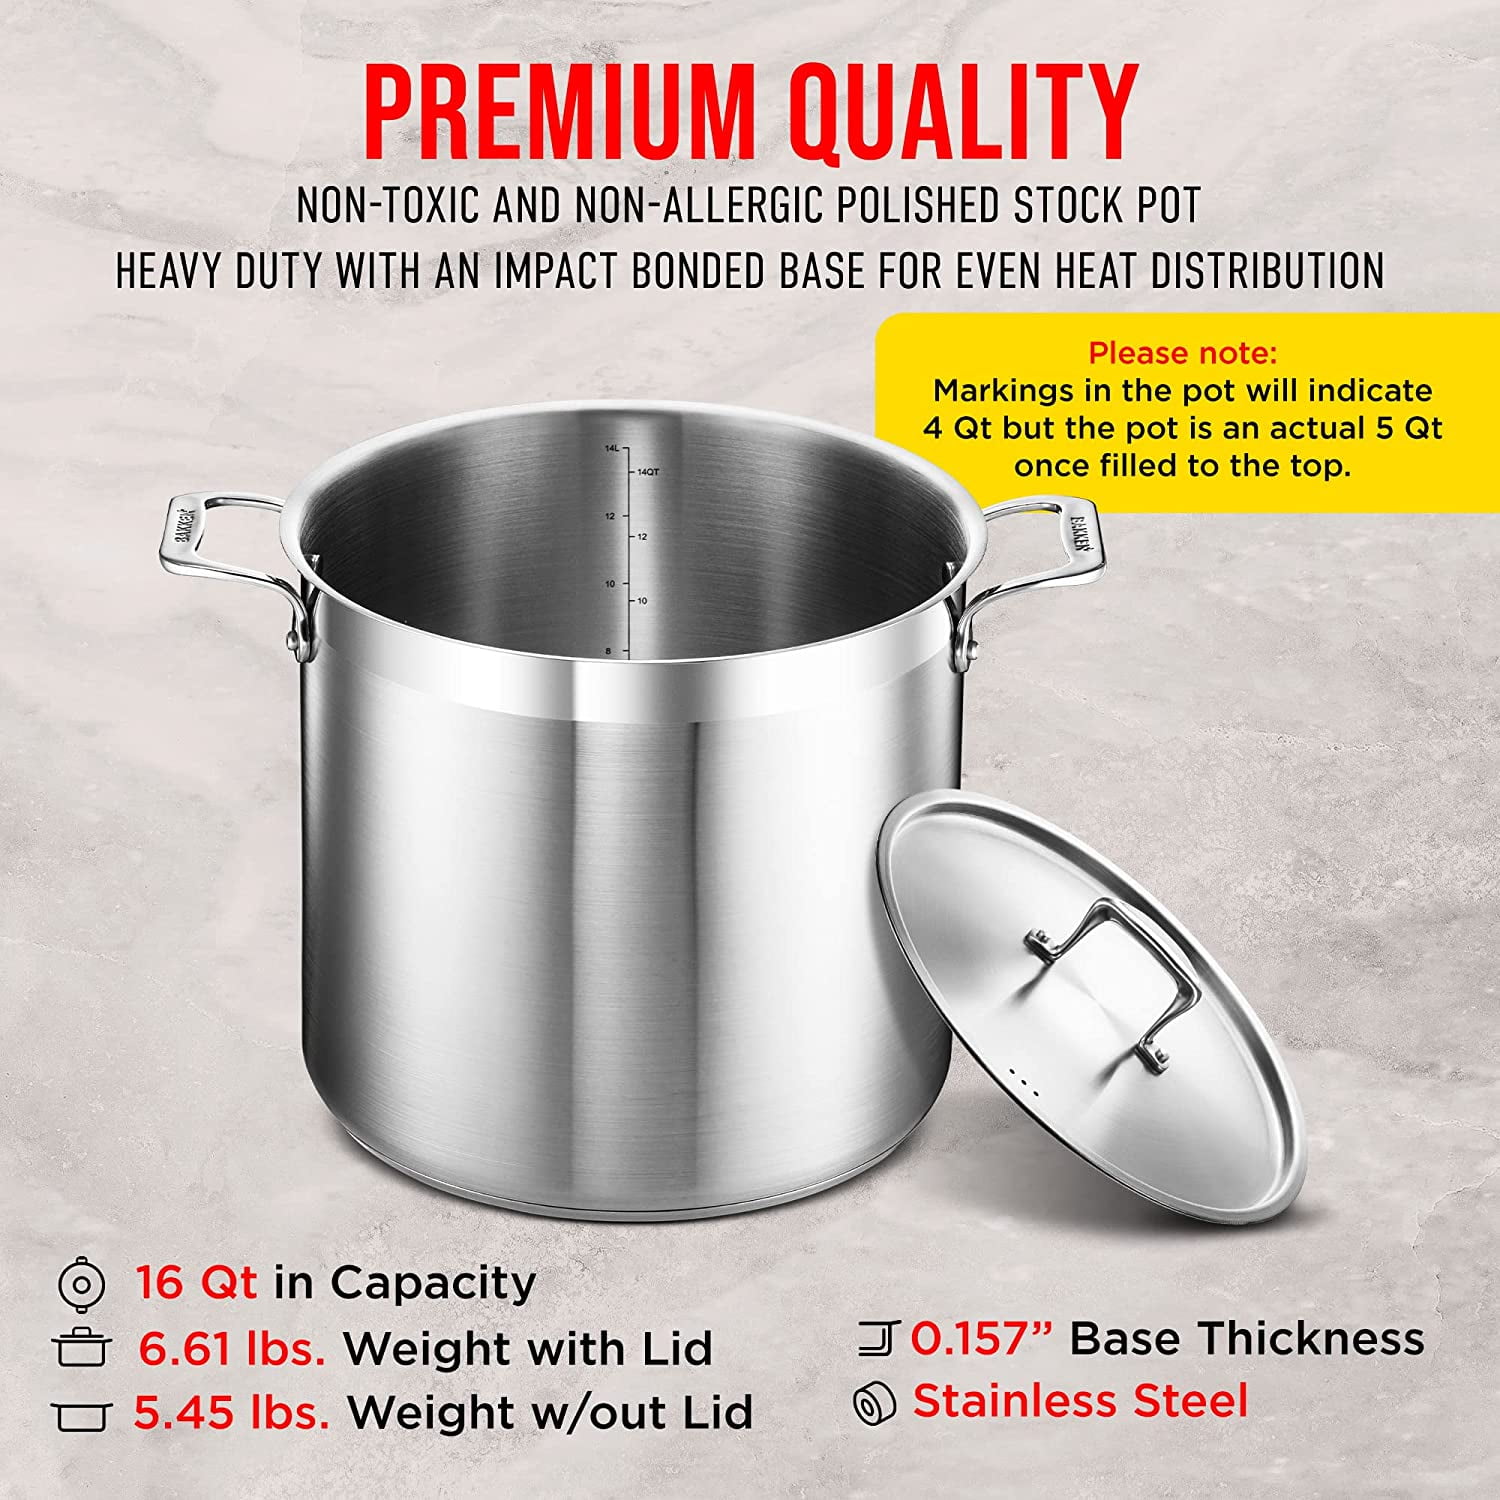 D5 Stainless Polished 5-ply Bonded Cookware, Stockpot with lid, 12 quart